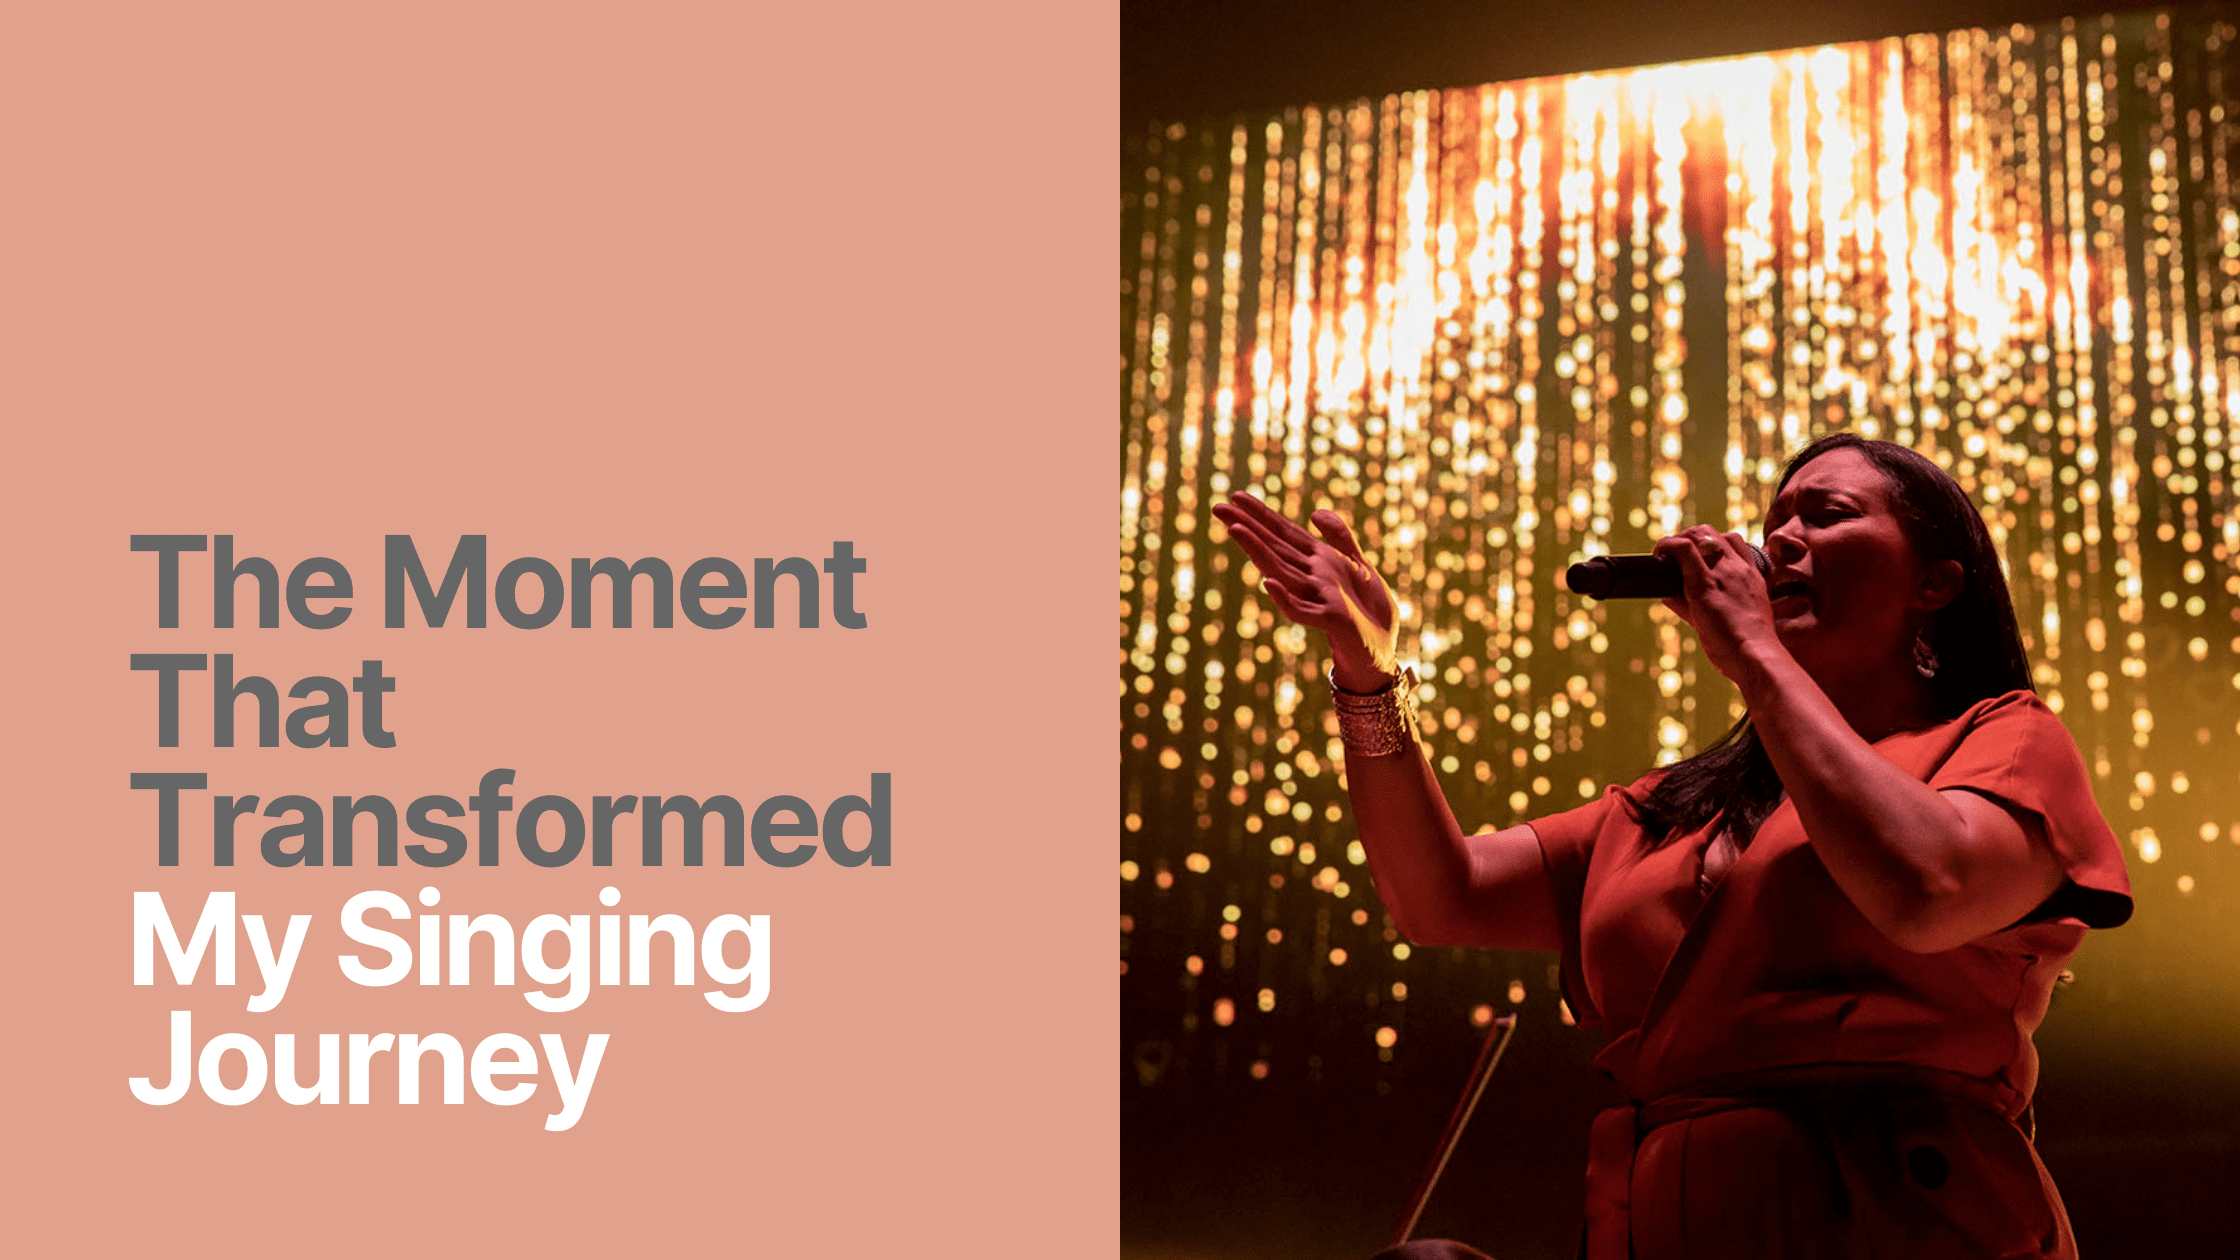 The Moment That Transformed My Singing Journey